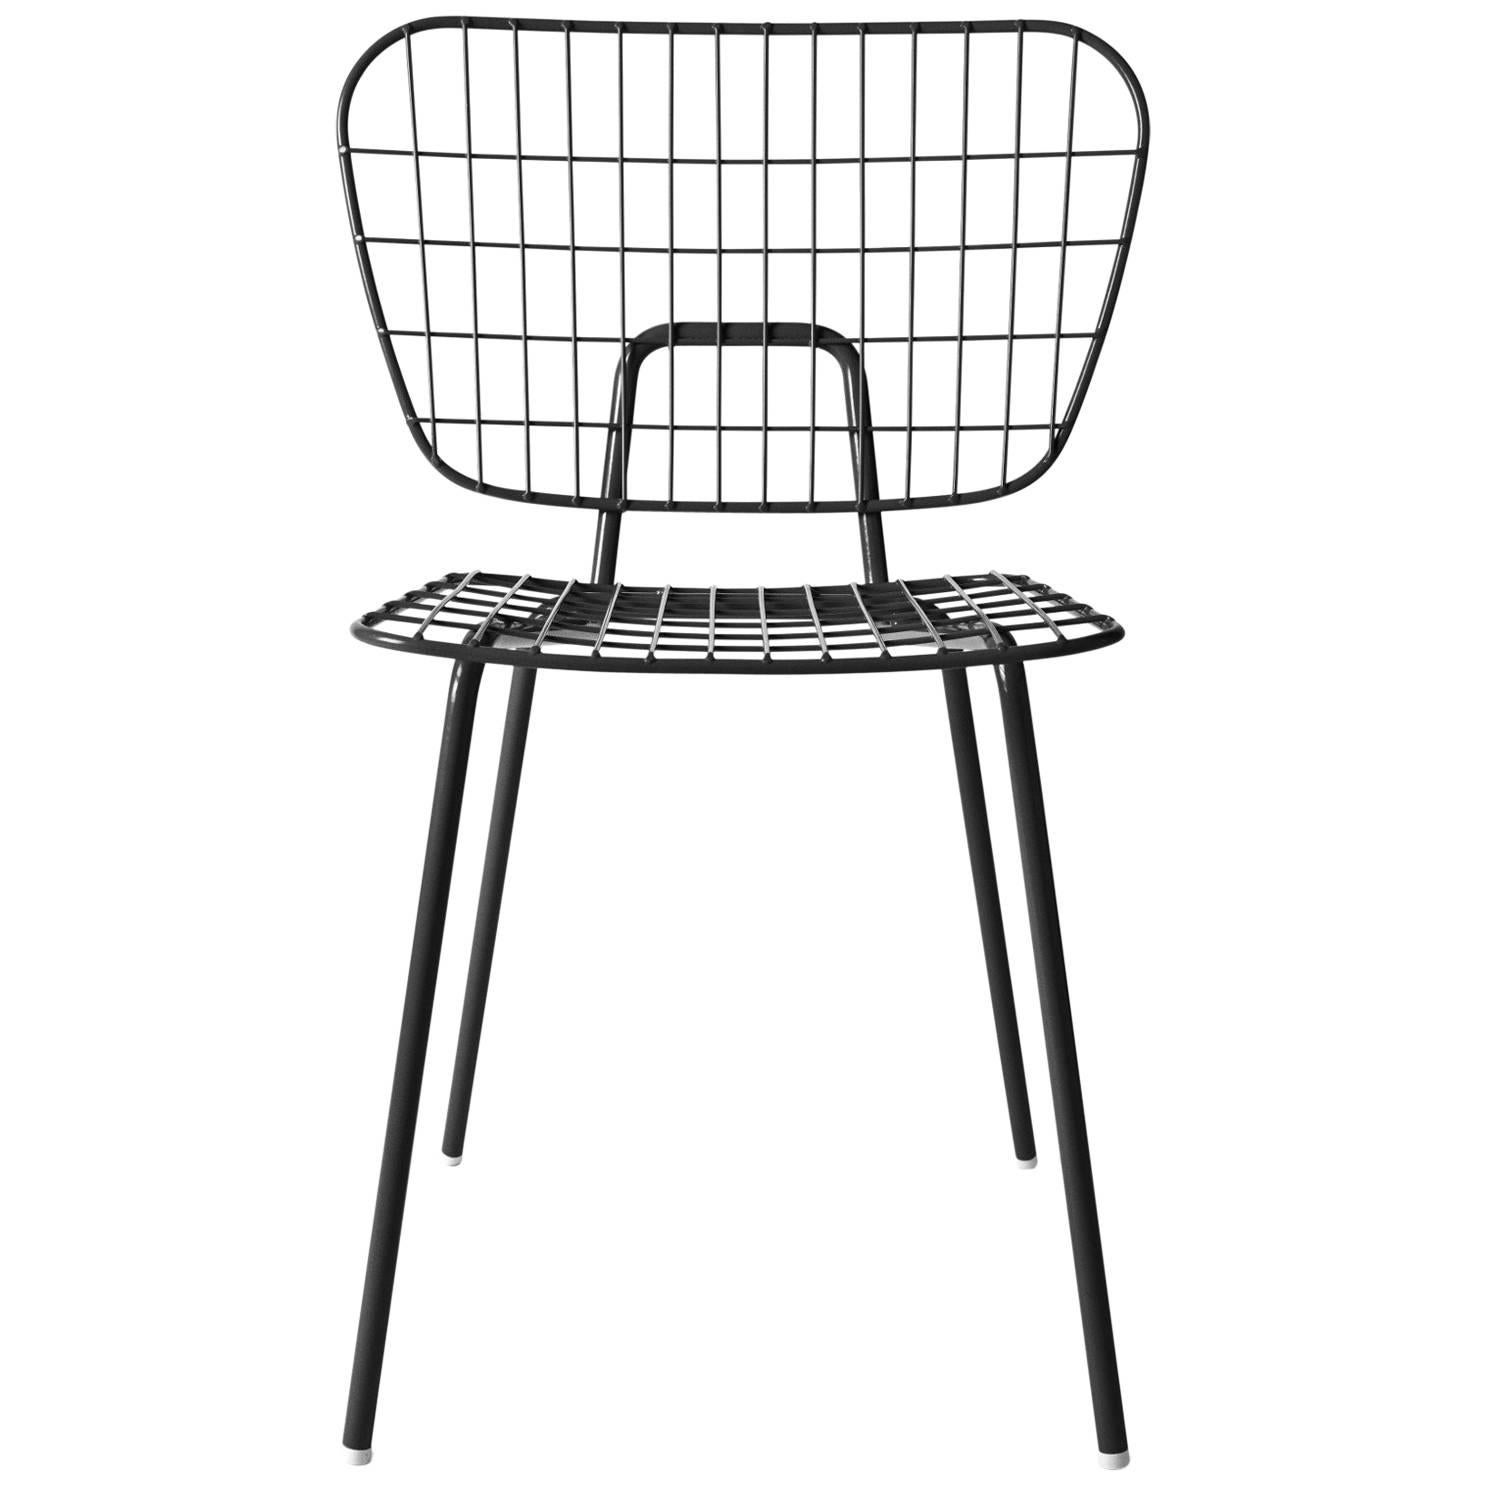 Wm String Dining Chair by Studio Wm, in Two-Pack, Black Steel Frame